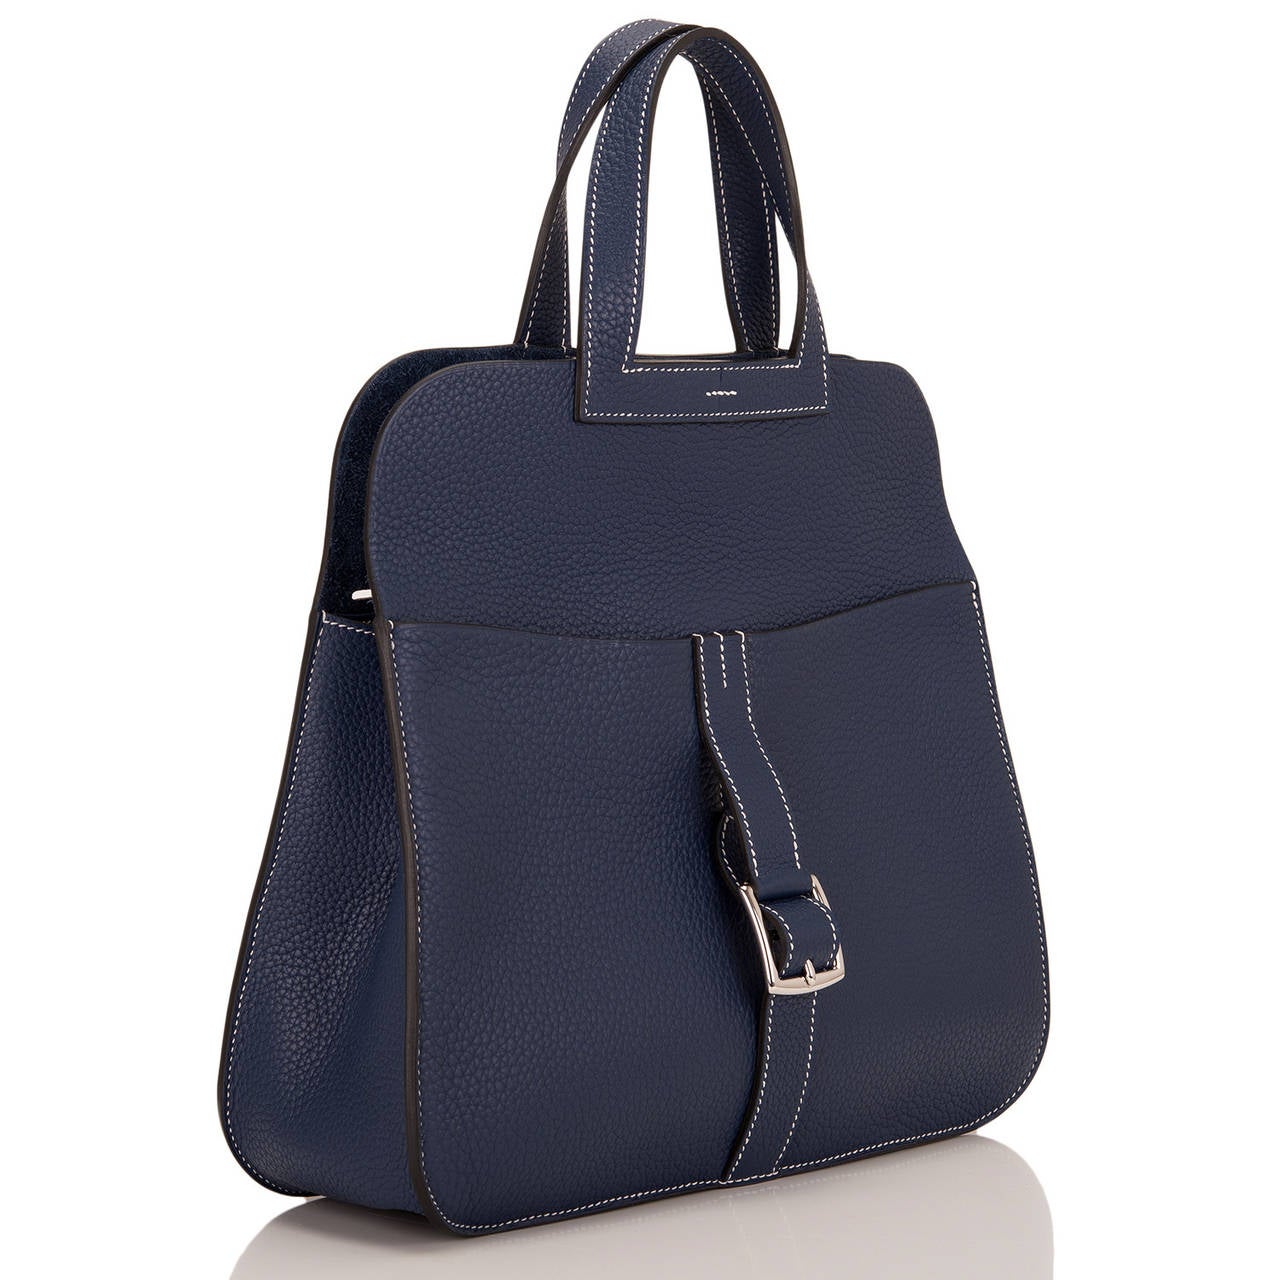 This Hermes Blue Sapphire Halzan bag is made of clemence leather with white contrast stitching, front buckle closure, two front pockets, two back pockets, and double flat leather handles and attachable single flat leather shoulder strap

The